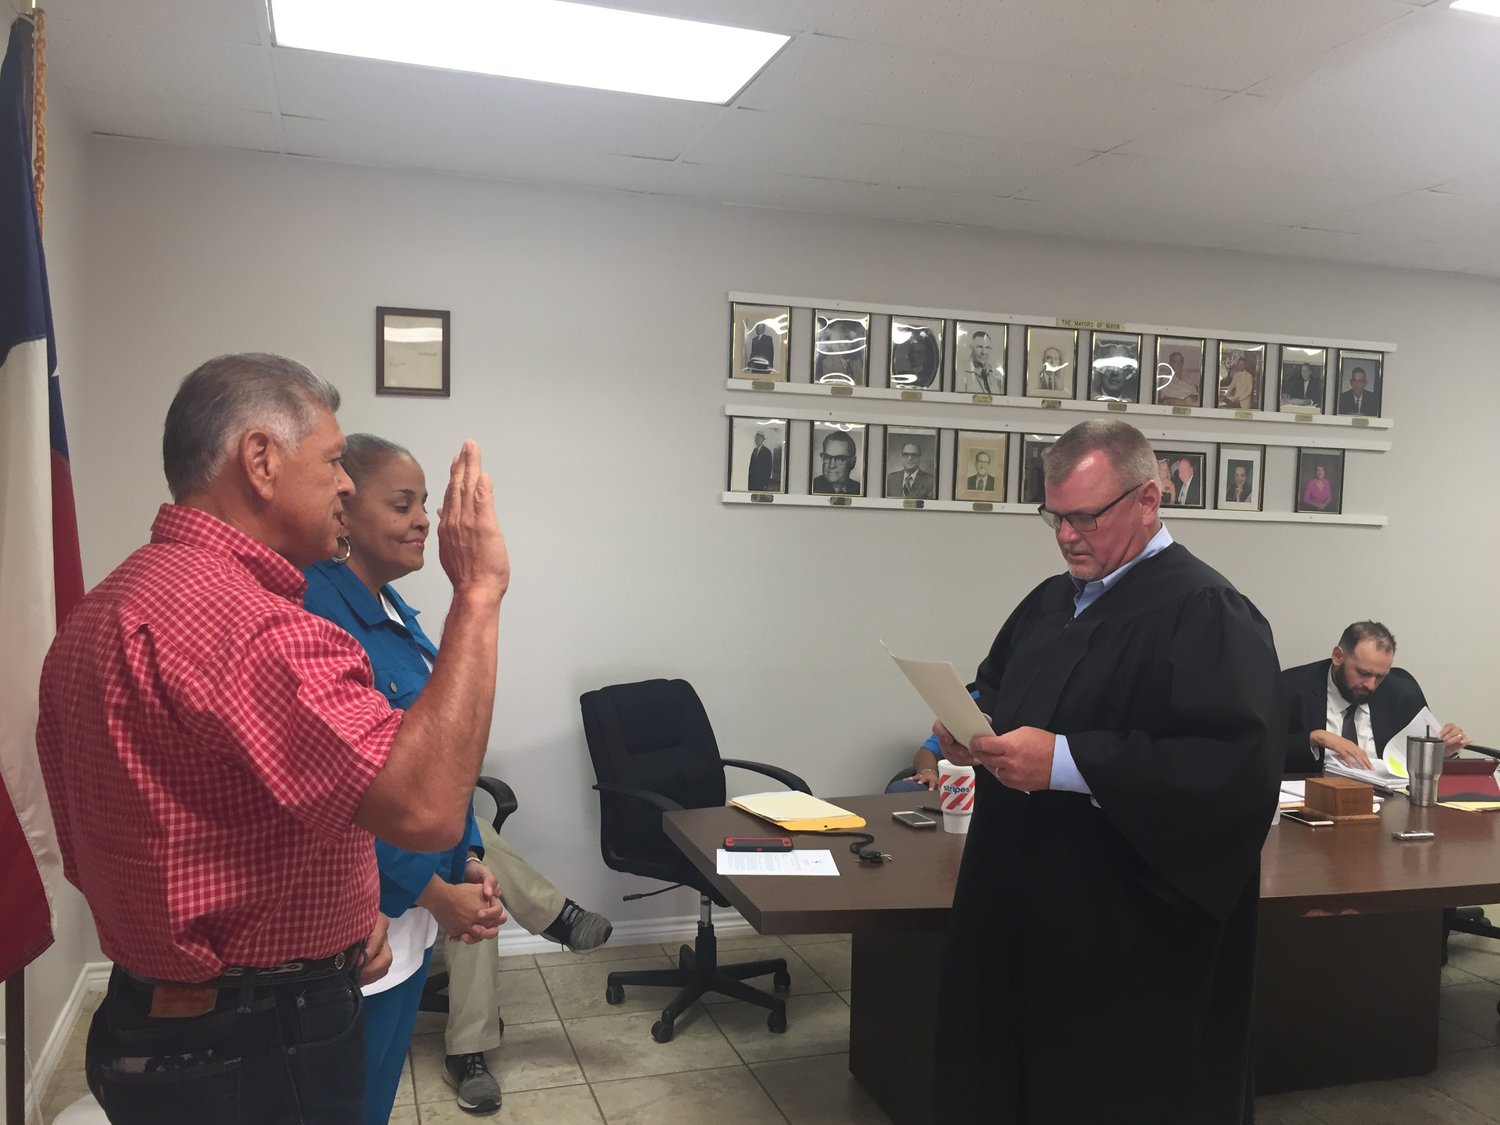 Mary Ann Fatheree and Estevan “Steve” Aguirre were sworn into office June 10 by Precinct 4 Justice of the Peace Darryl Becker. Fatheree won reelection while Aguirre, the top vote getter in the election, defeated incumbent Joseph “Joey” Bjorgaard and other candidates to become a Nixon Alderperson.